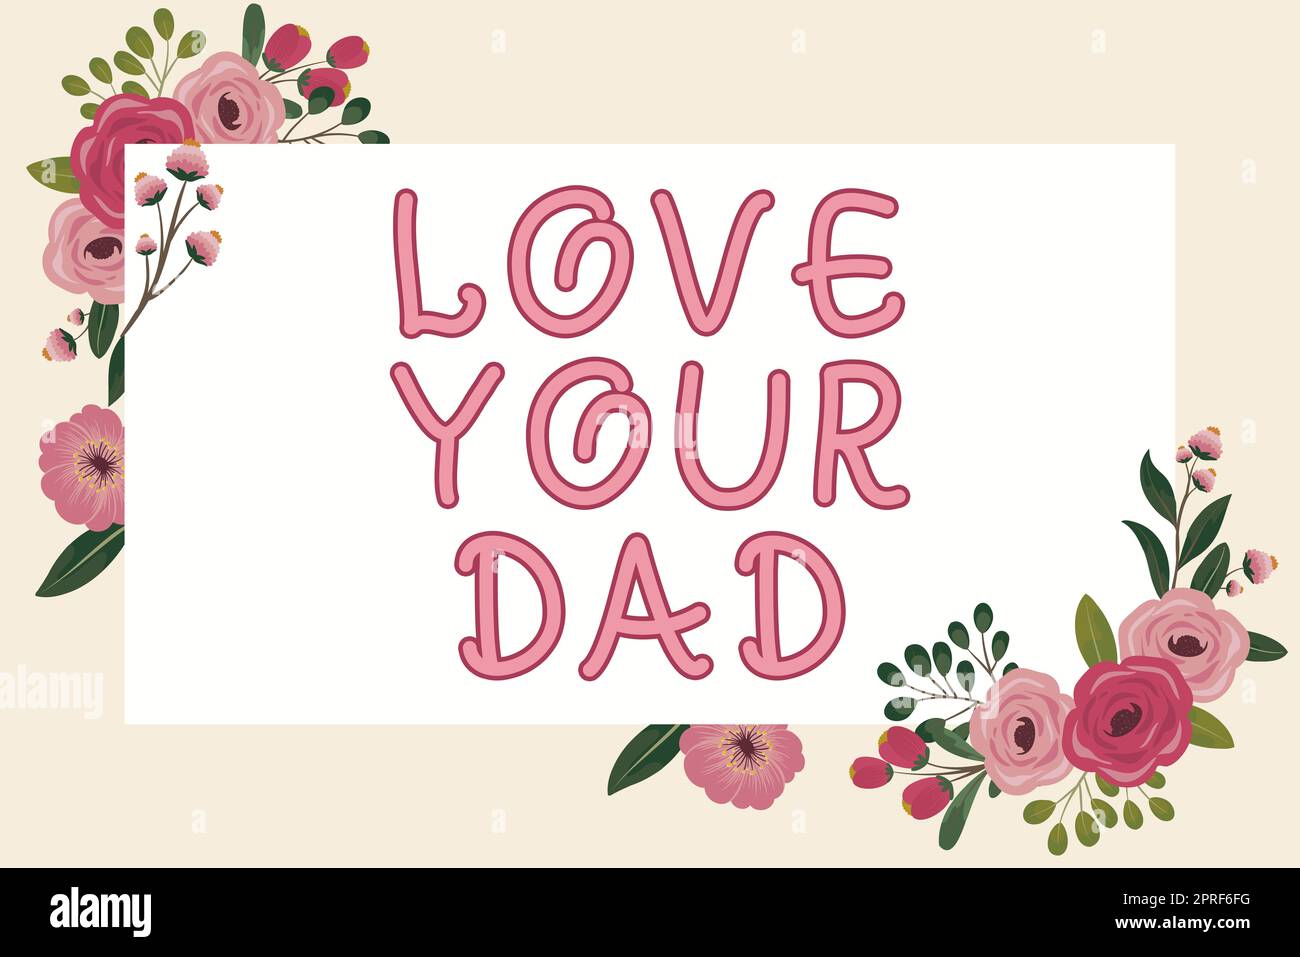 Text caption presenting Love Your Dad, Word Written on Have good feelings about your father Loving emotions Frame Decorated With Colorful Flowers And Stock Photo